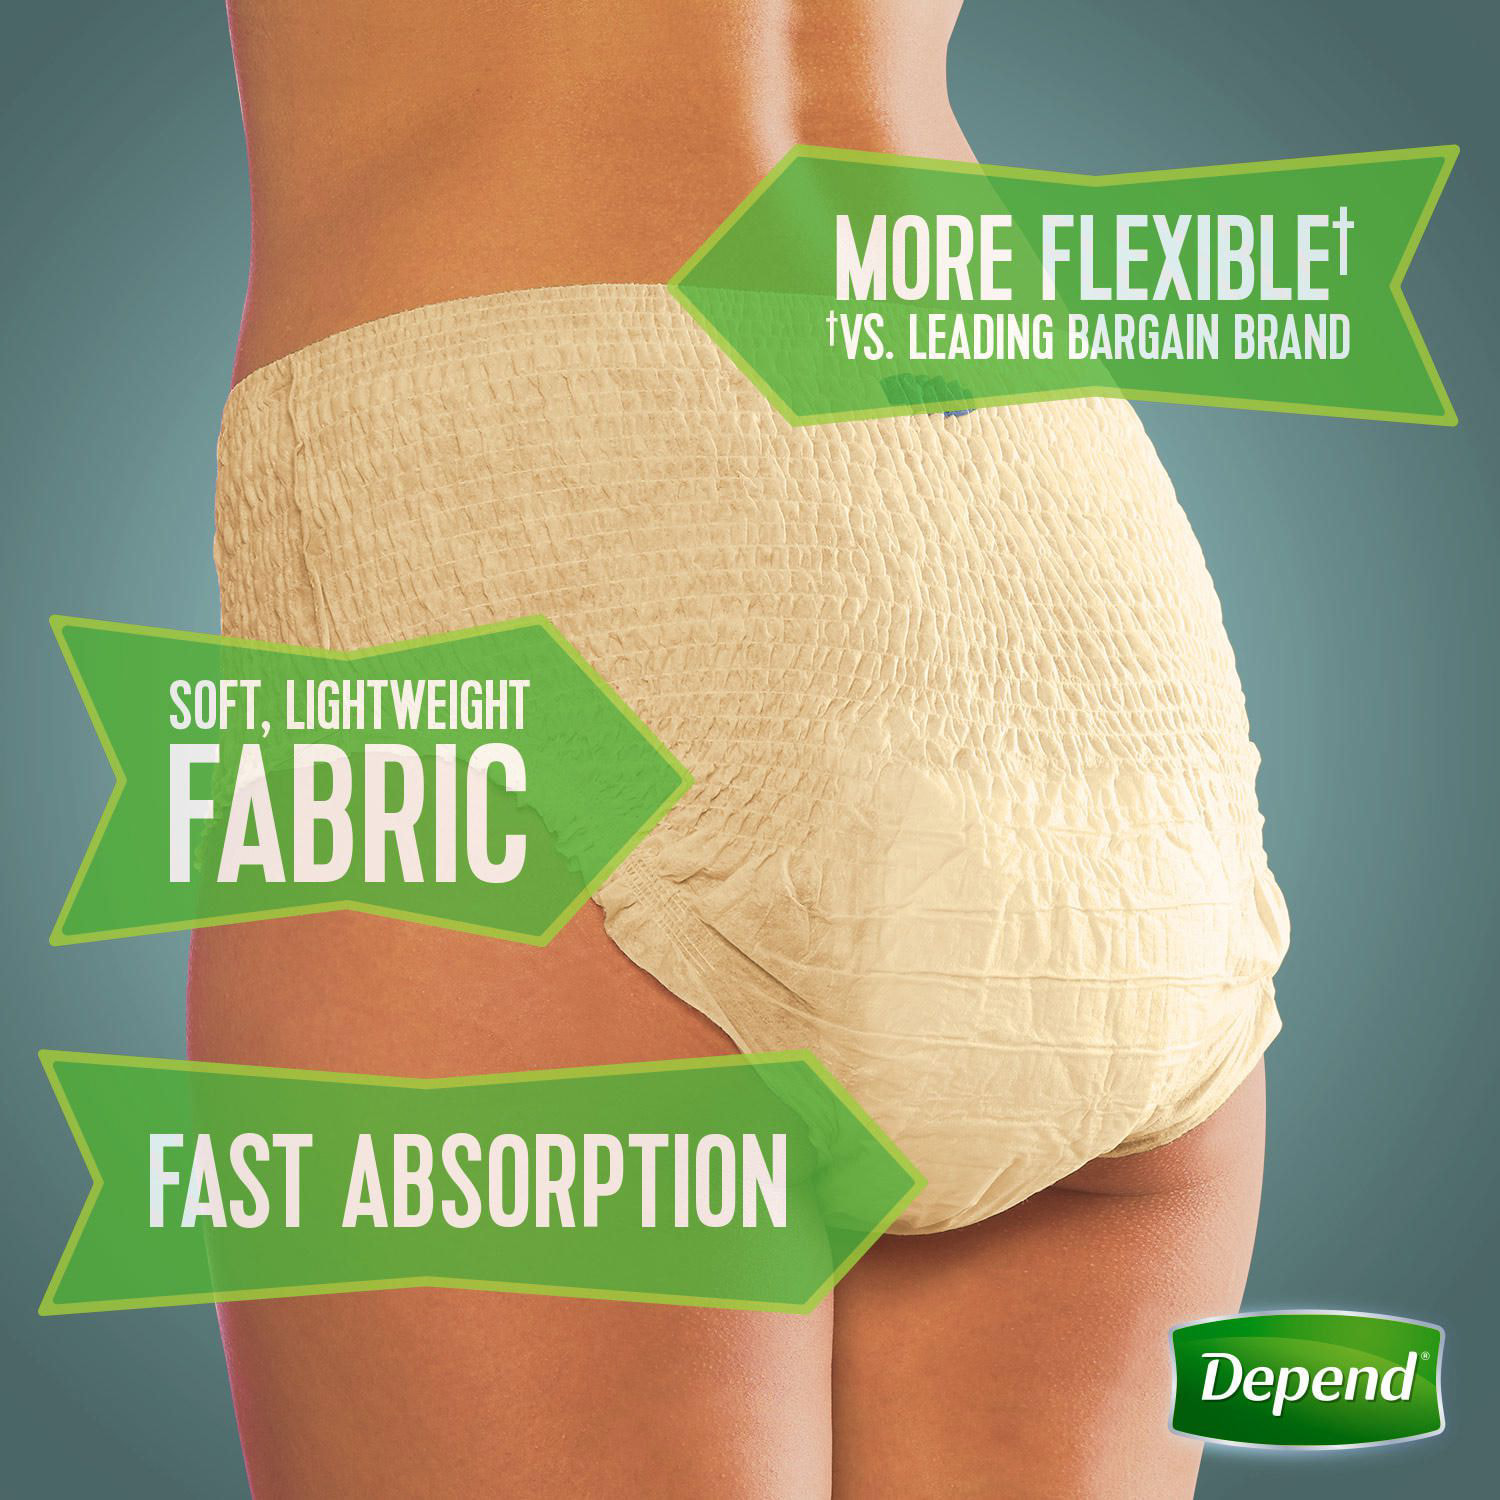 Depend FIT-FLEX Moderate Absorbency Small Medium Incontinence